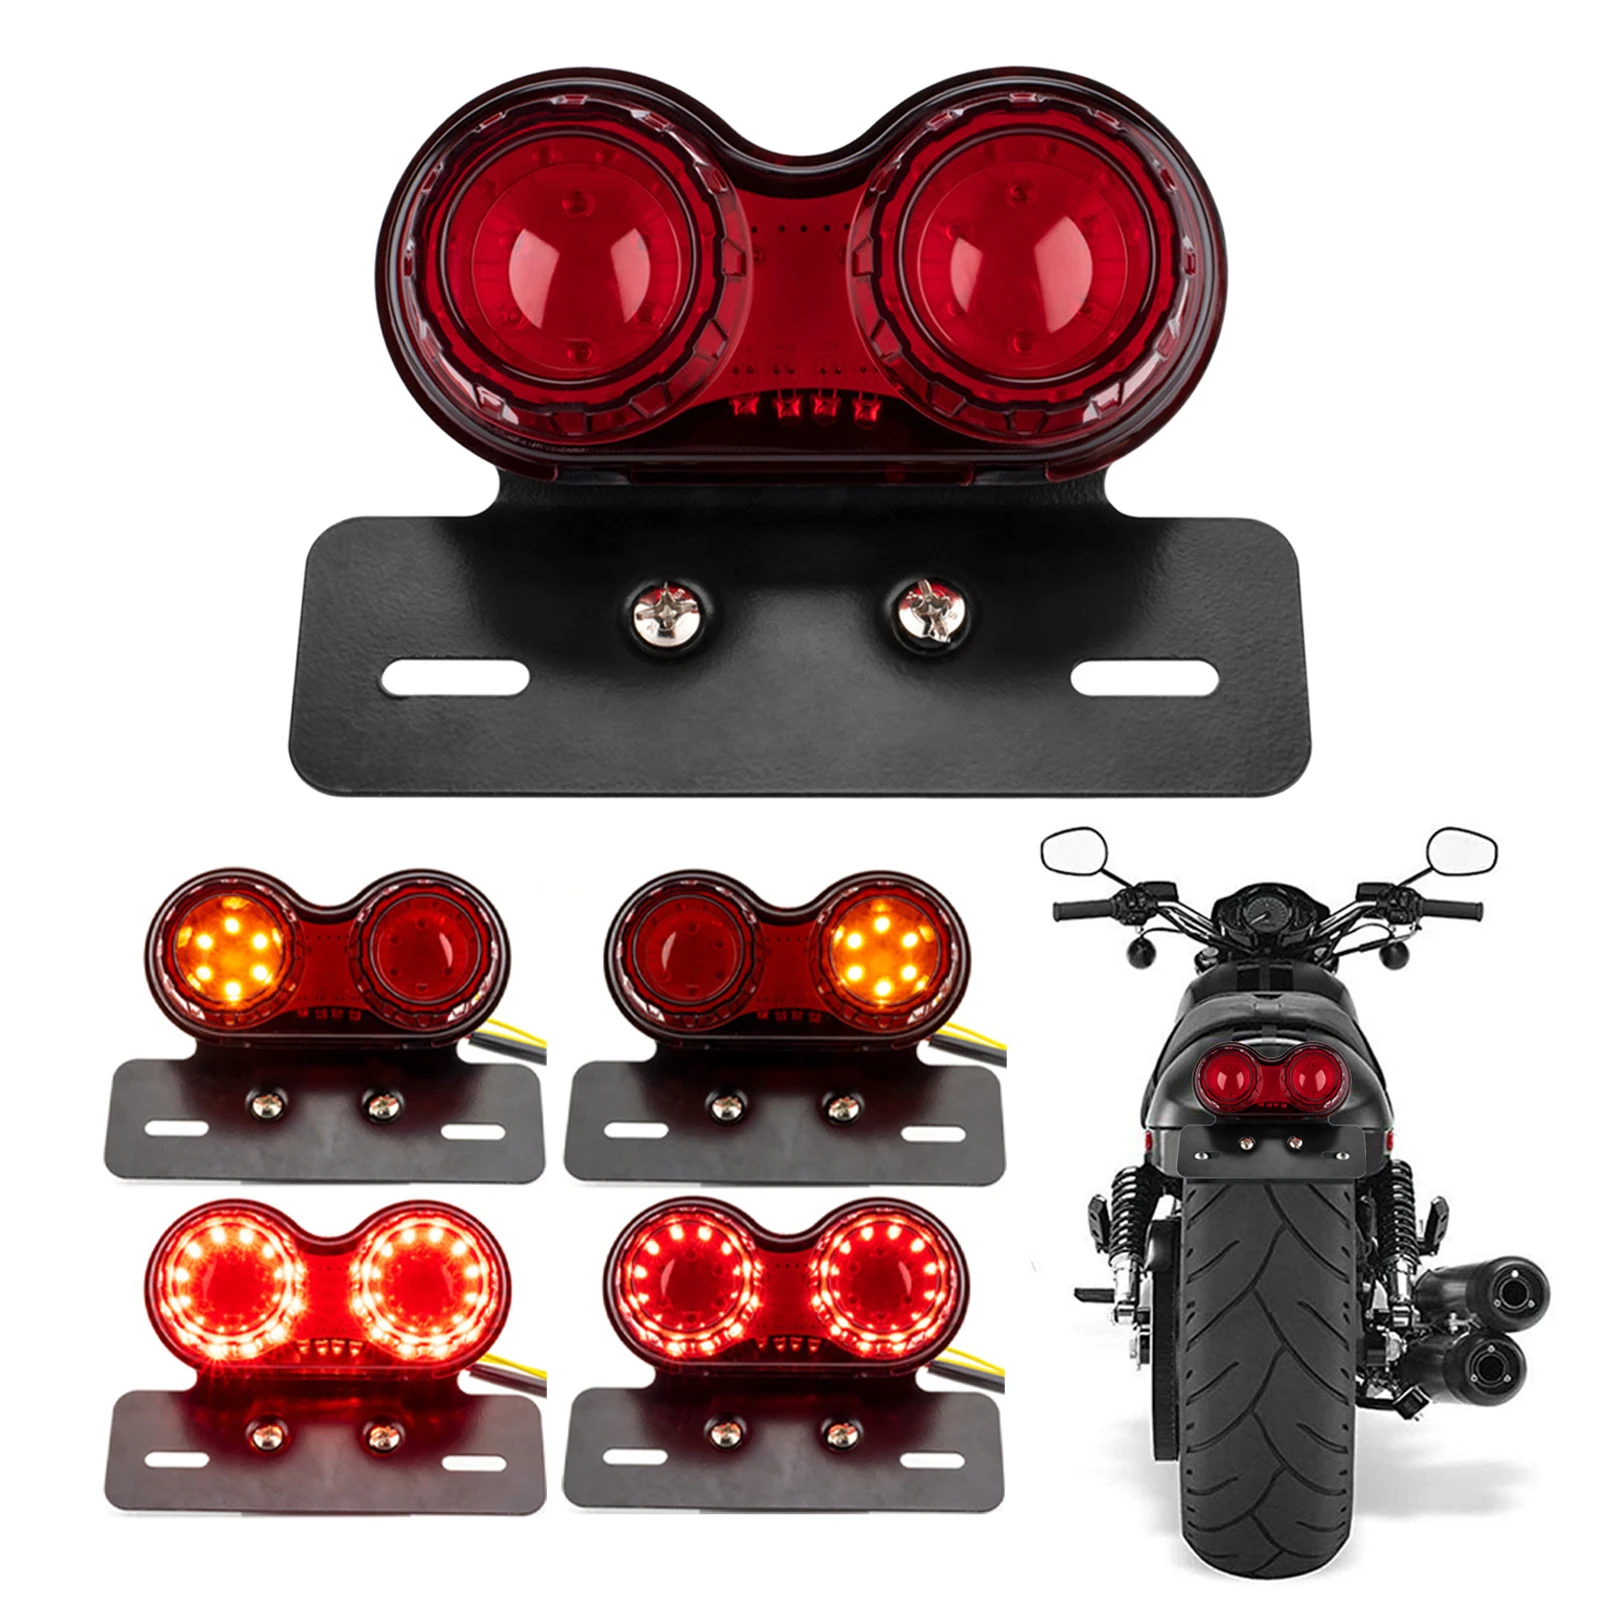 ANKIA 12V 16 LED Universal Motorcycle Integrated Brake Tail Running Light Turn Signla License Plate Lamp Clear Cover 